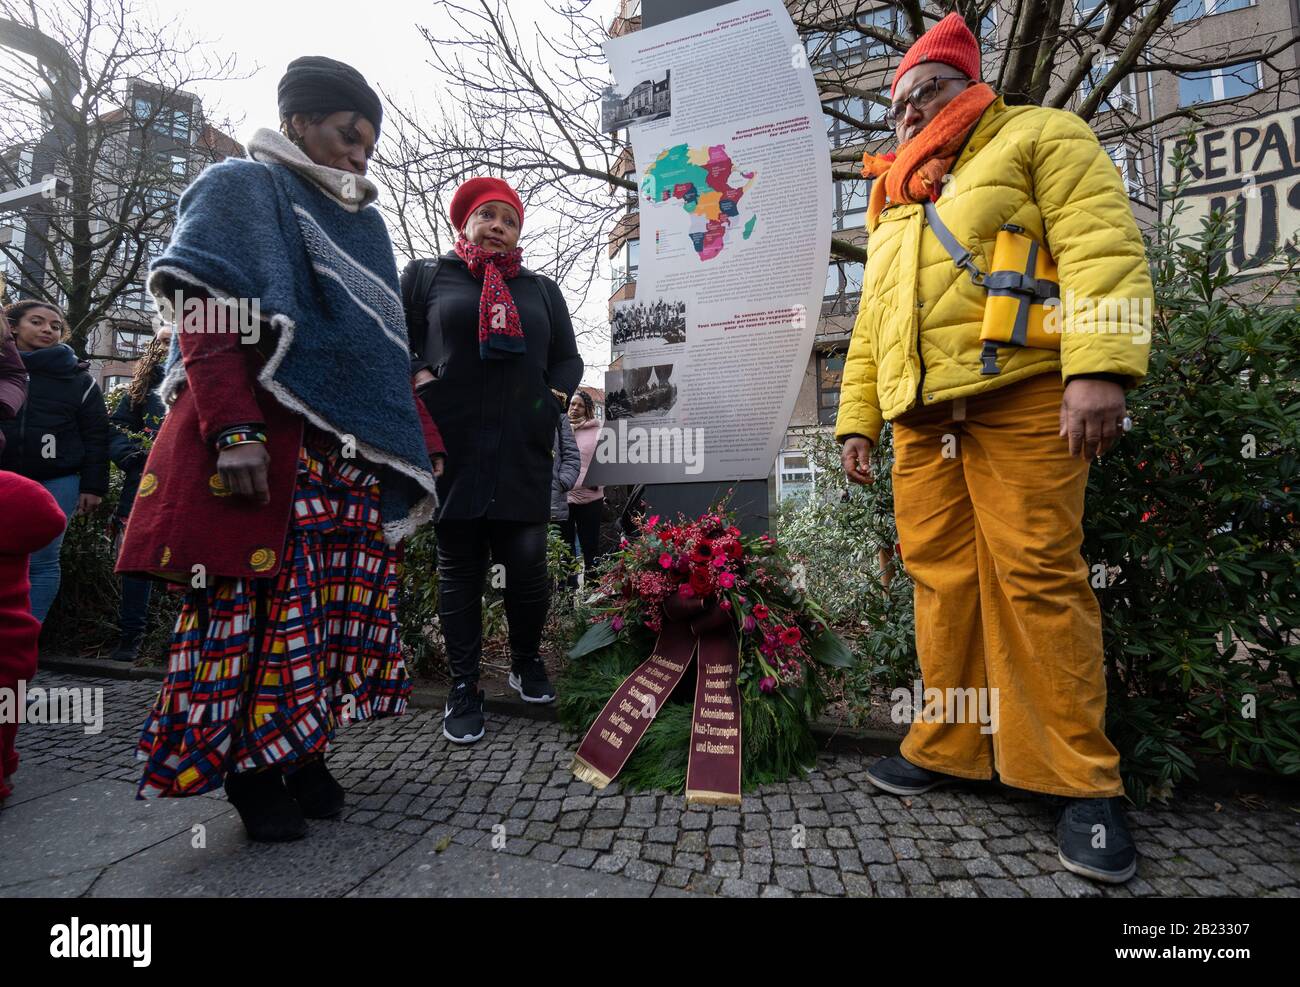 Berlin, Germany. 29th Feb, 2020. A wreath is laid at the commemoration march for African victims of enslavement, colonialism and racism of the Committee for an African Monument in Berlin. Credit: Christophe Gateau/dpa/Alamy Live News Stock Photo